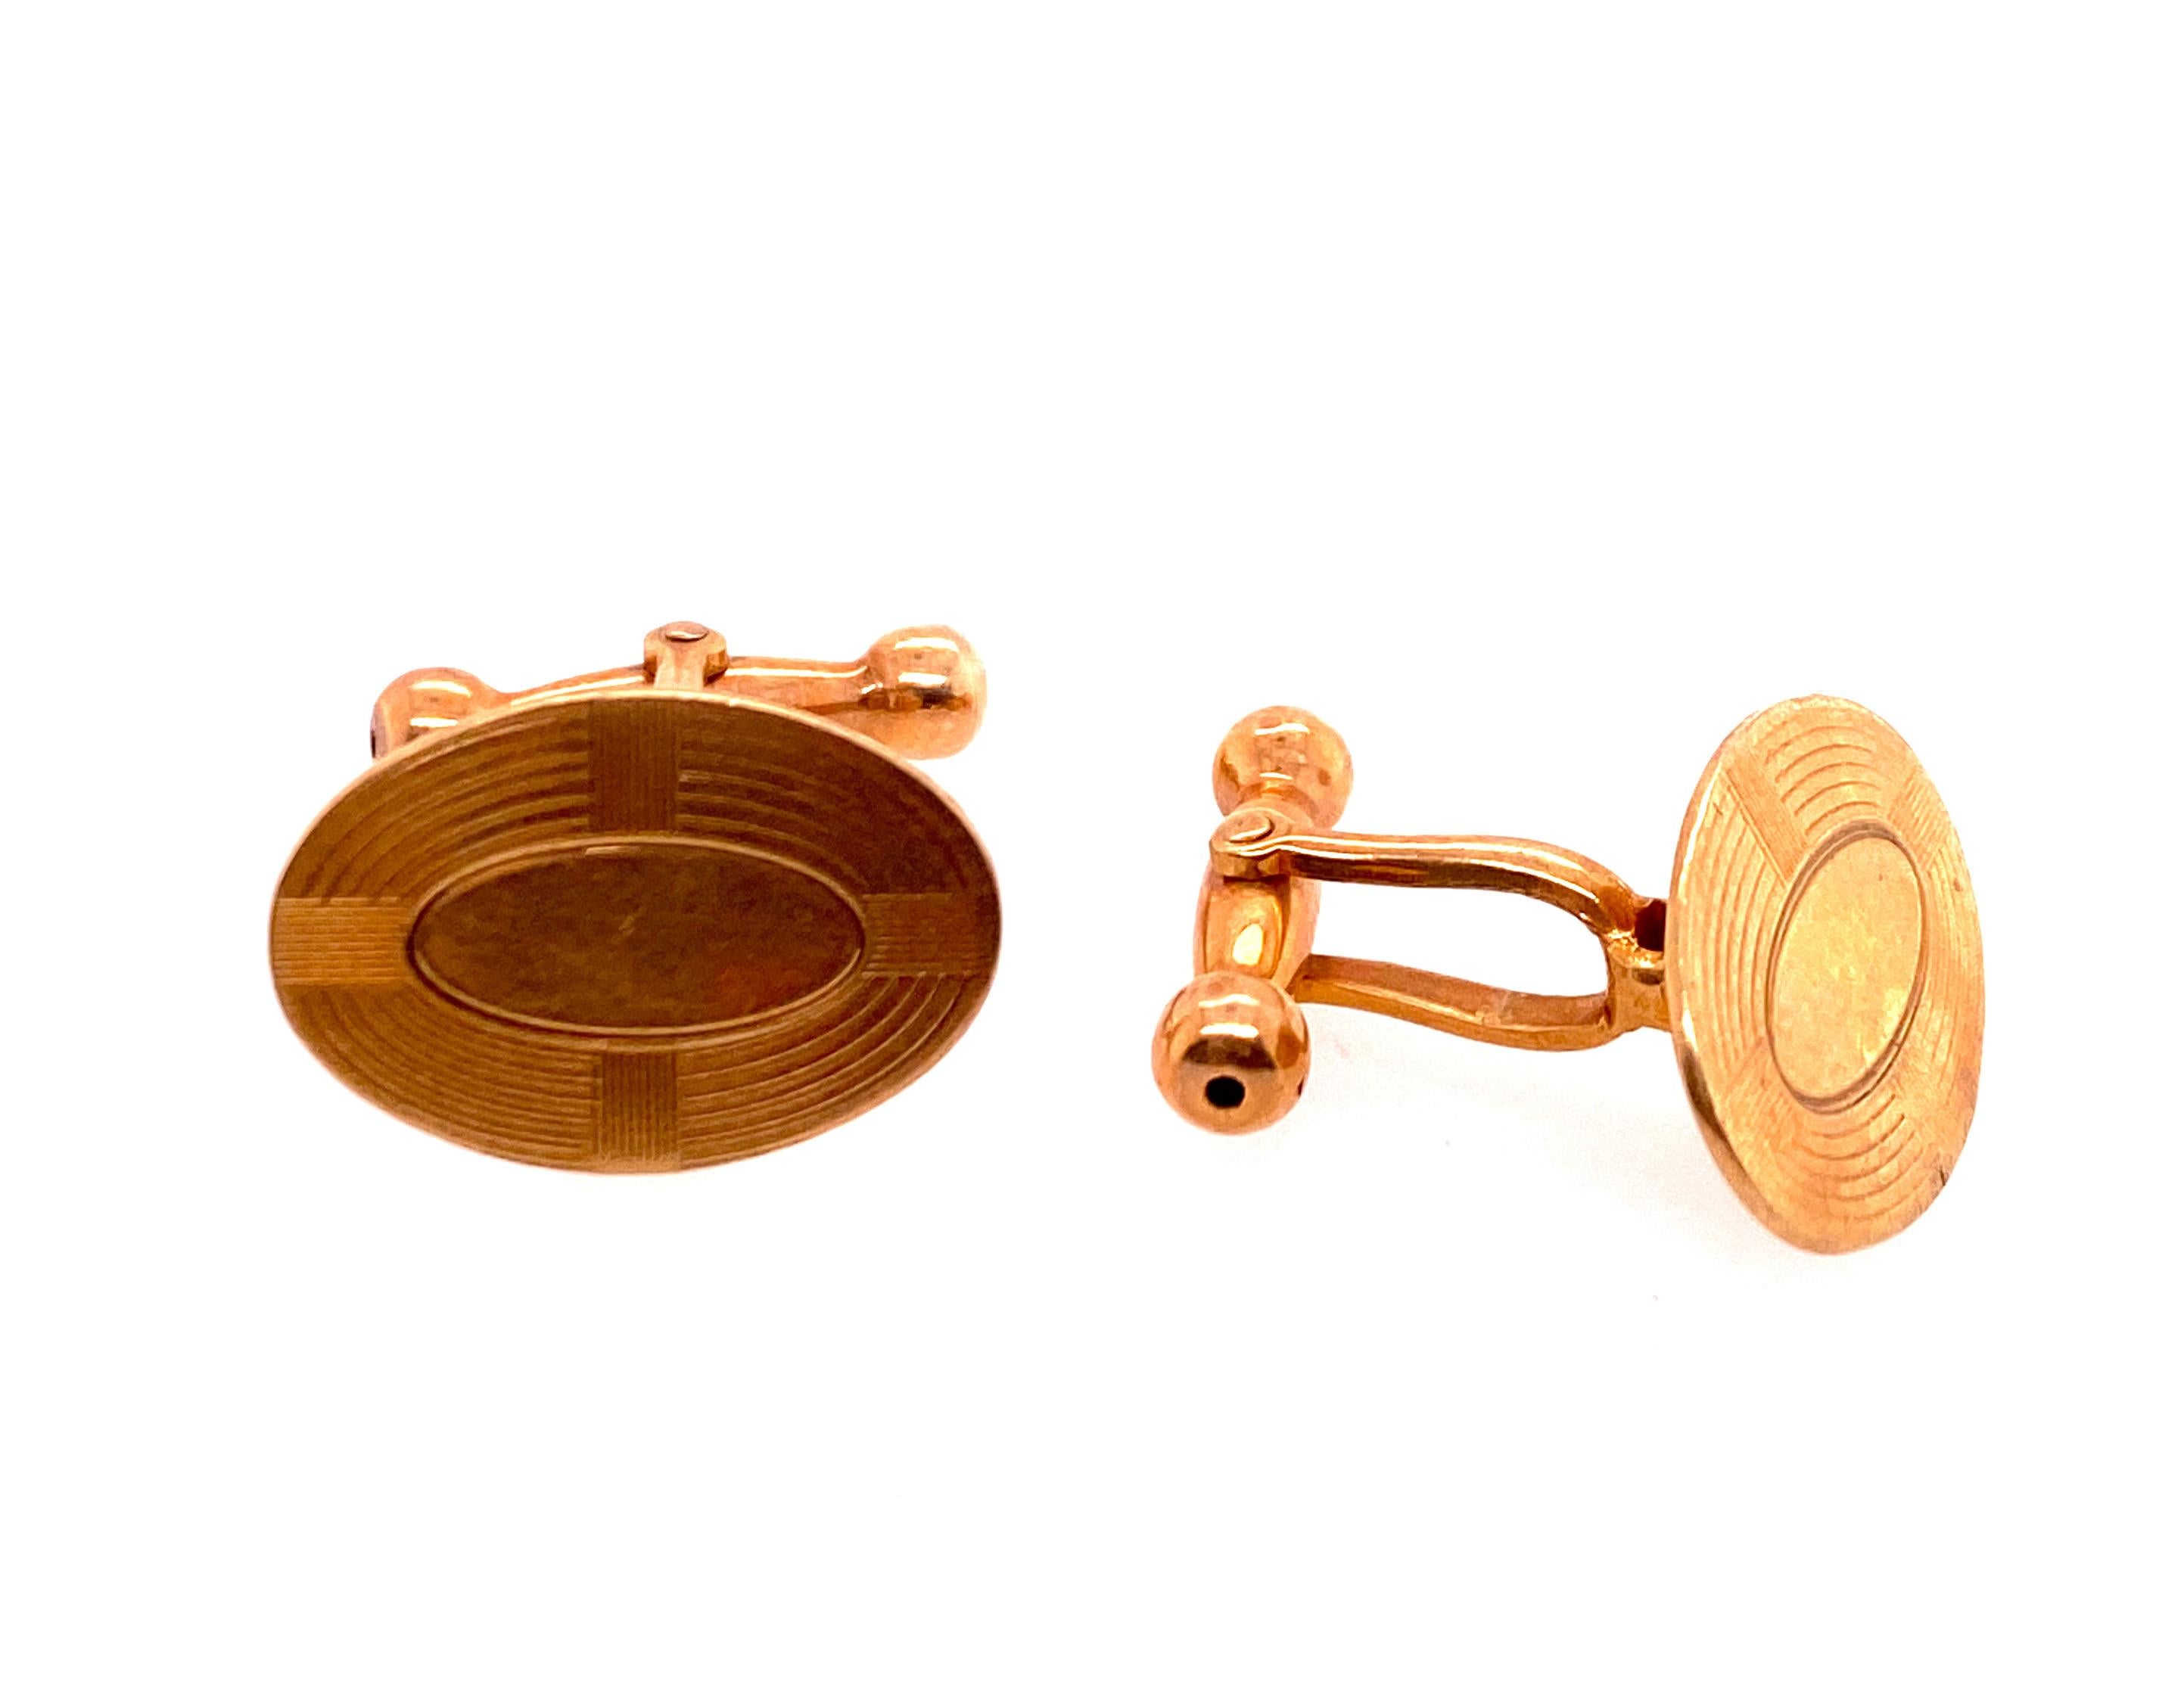 Vintage Cufflinks Hand Engraved Yellow Gold Antique Art Deco



These Cufflinks Weigh a Heavy 5.8 Grams

That's Over $200 in Gold Value Alone

Solid 10K Yellow Gold 

Thick & Durable 

Circa 1920's-1930's

The Art Deco Era in Jewelry Design

Genuine